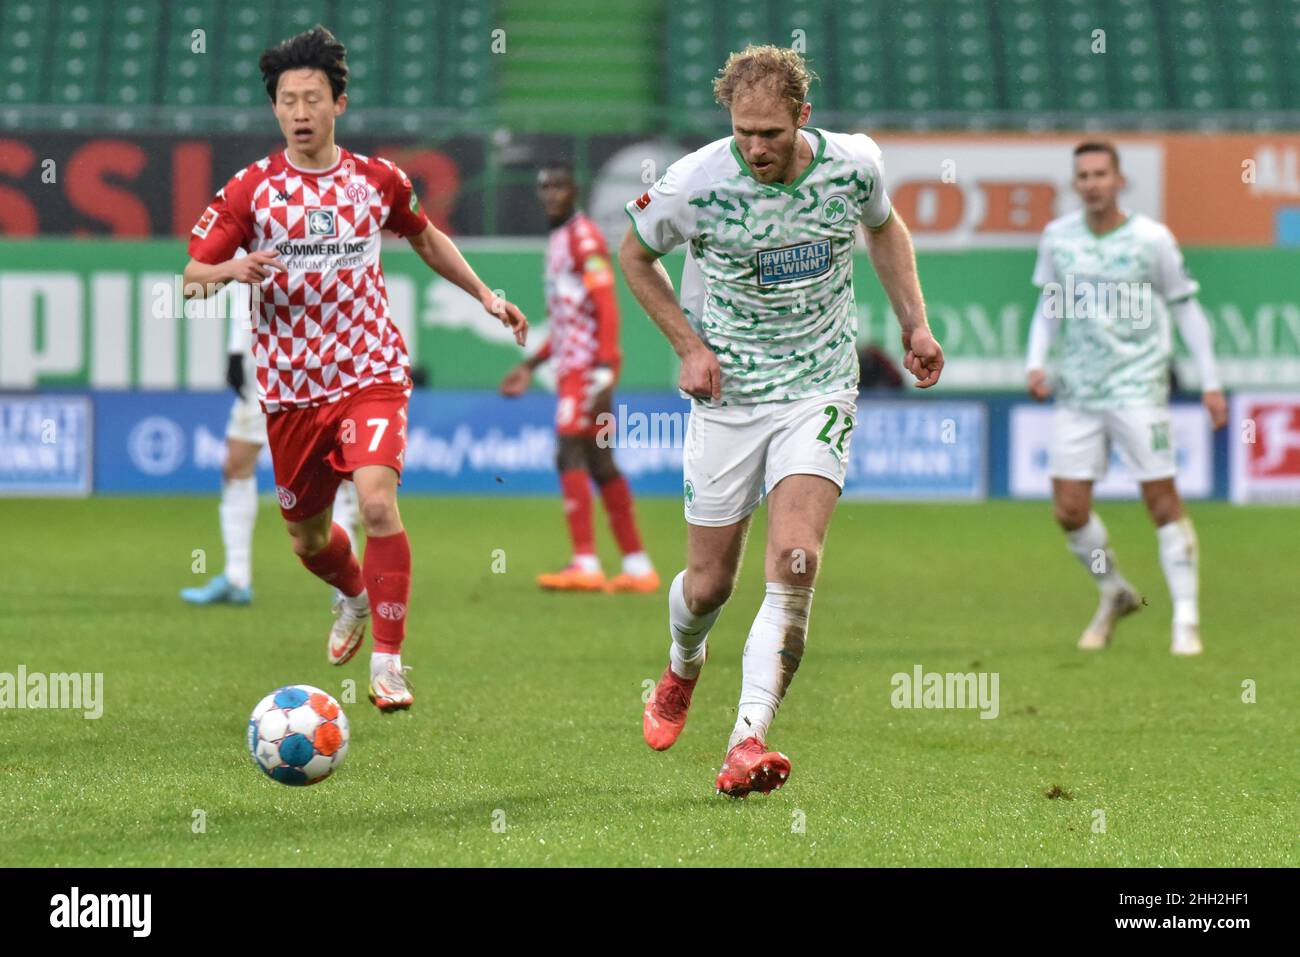 Germany ,Fuerth, Sportpark Ronhof Thomas Sommer - 22 Jan 2022 - Fussball, 1.Bundesliga - SpVgg Greuther Fuerth vs. FSV Mainz 05  Image: (fLTR) Jae-Sung Lee (Mainz, 7), Sebastian Griesbeck (SpVgg Greuther Fürth,22)  DFL regulations prohibit any use of photographs as image sequences and or quasi-video Stock Photo